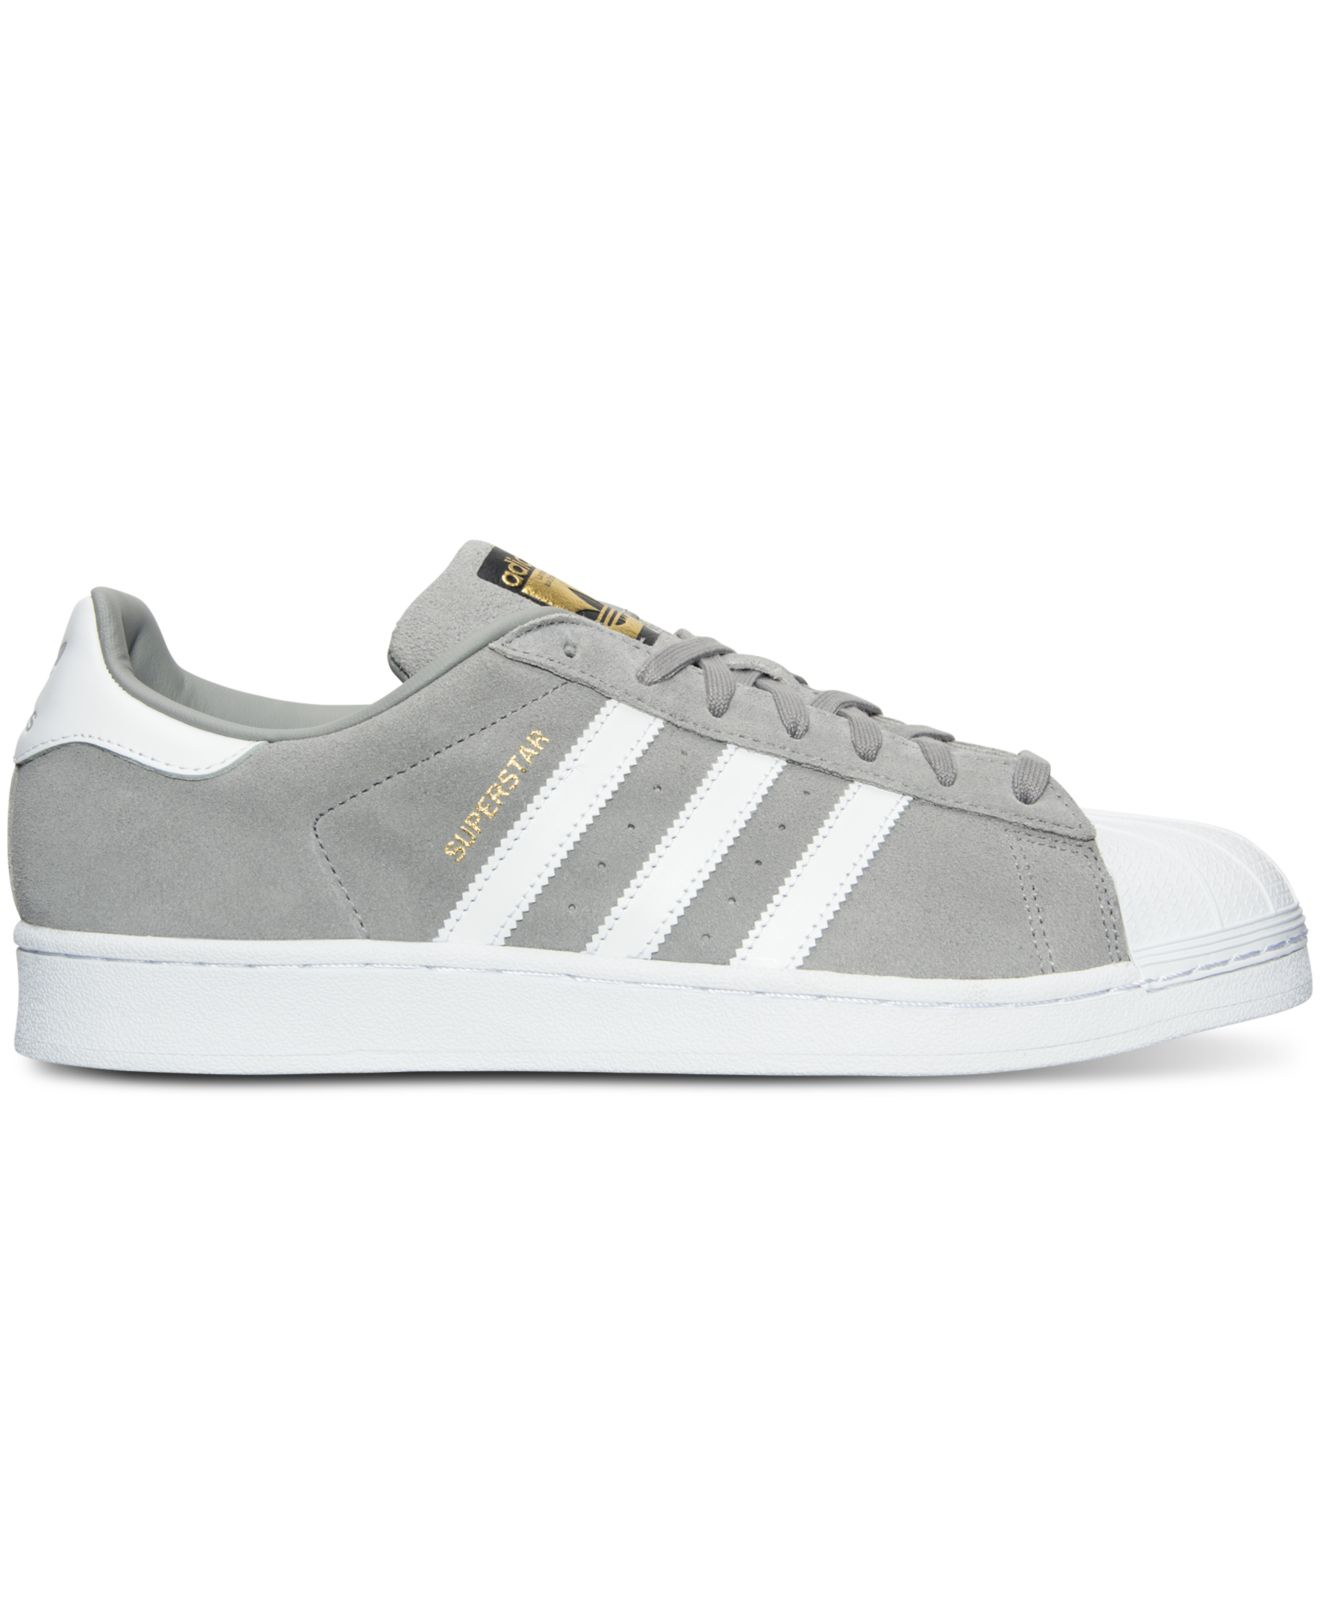 Adidas originals Men's Superstar Casual Sneakers From Finish Line in ...